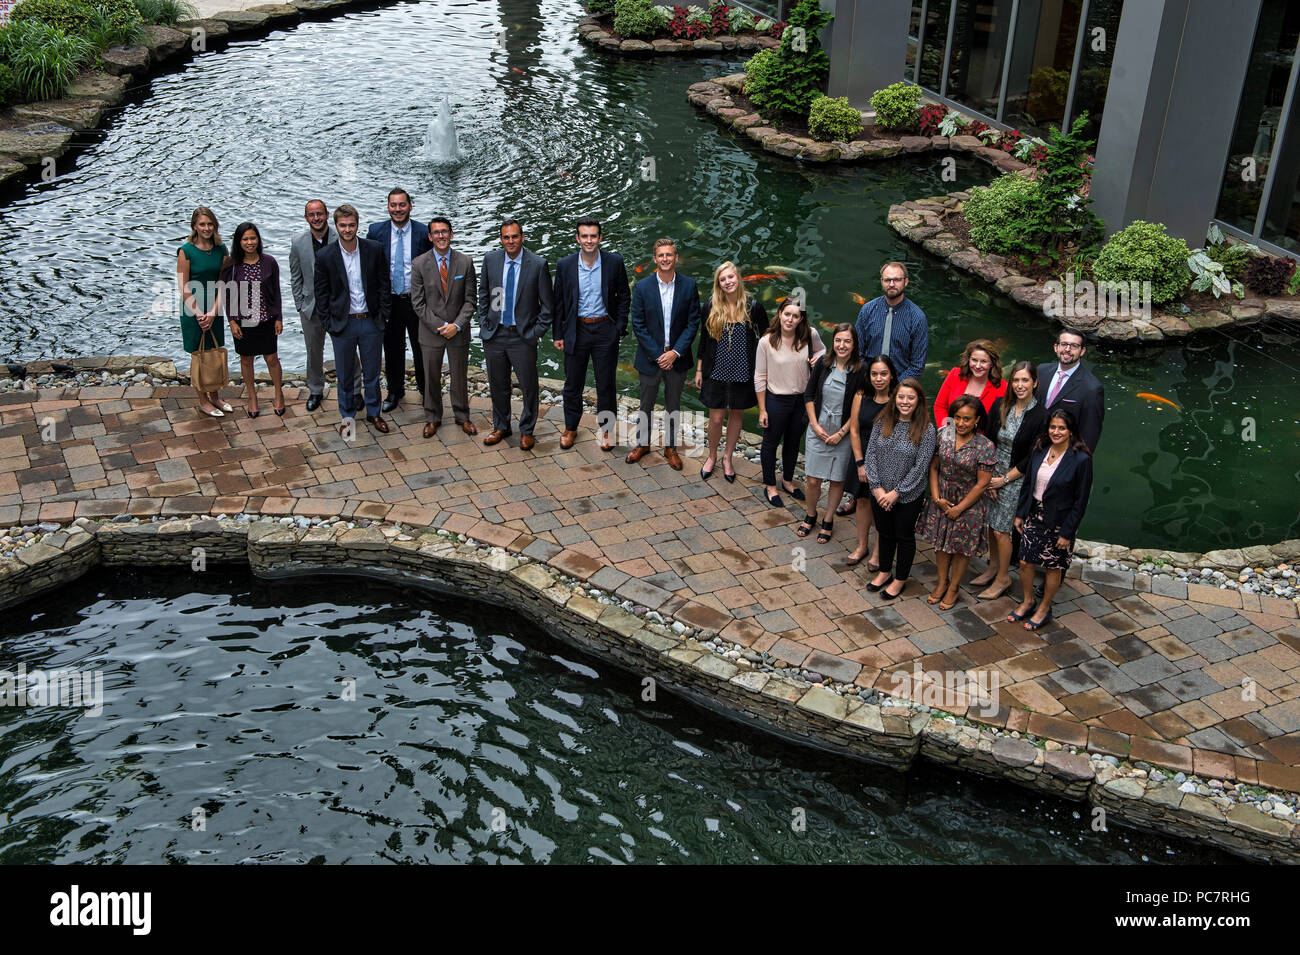 UNITED STATES: July 31, 2018: People that attended the Next Gen luncheon at the 2941 Restaurant in Arlington Virginia pose for a photo at the koi fish Stock Photo